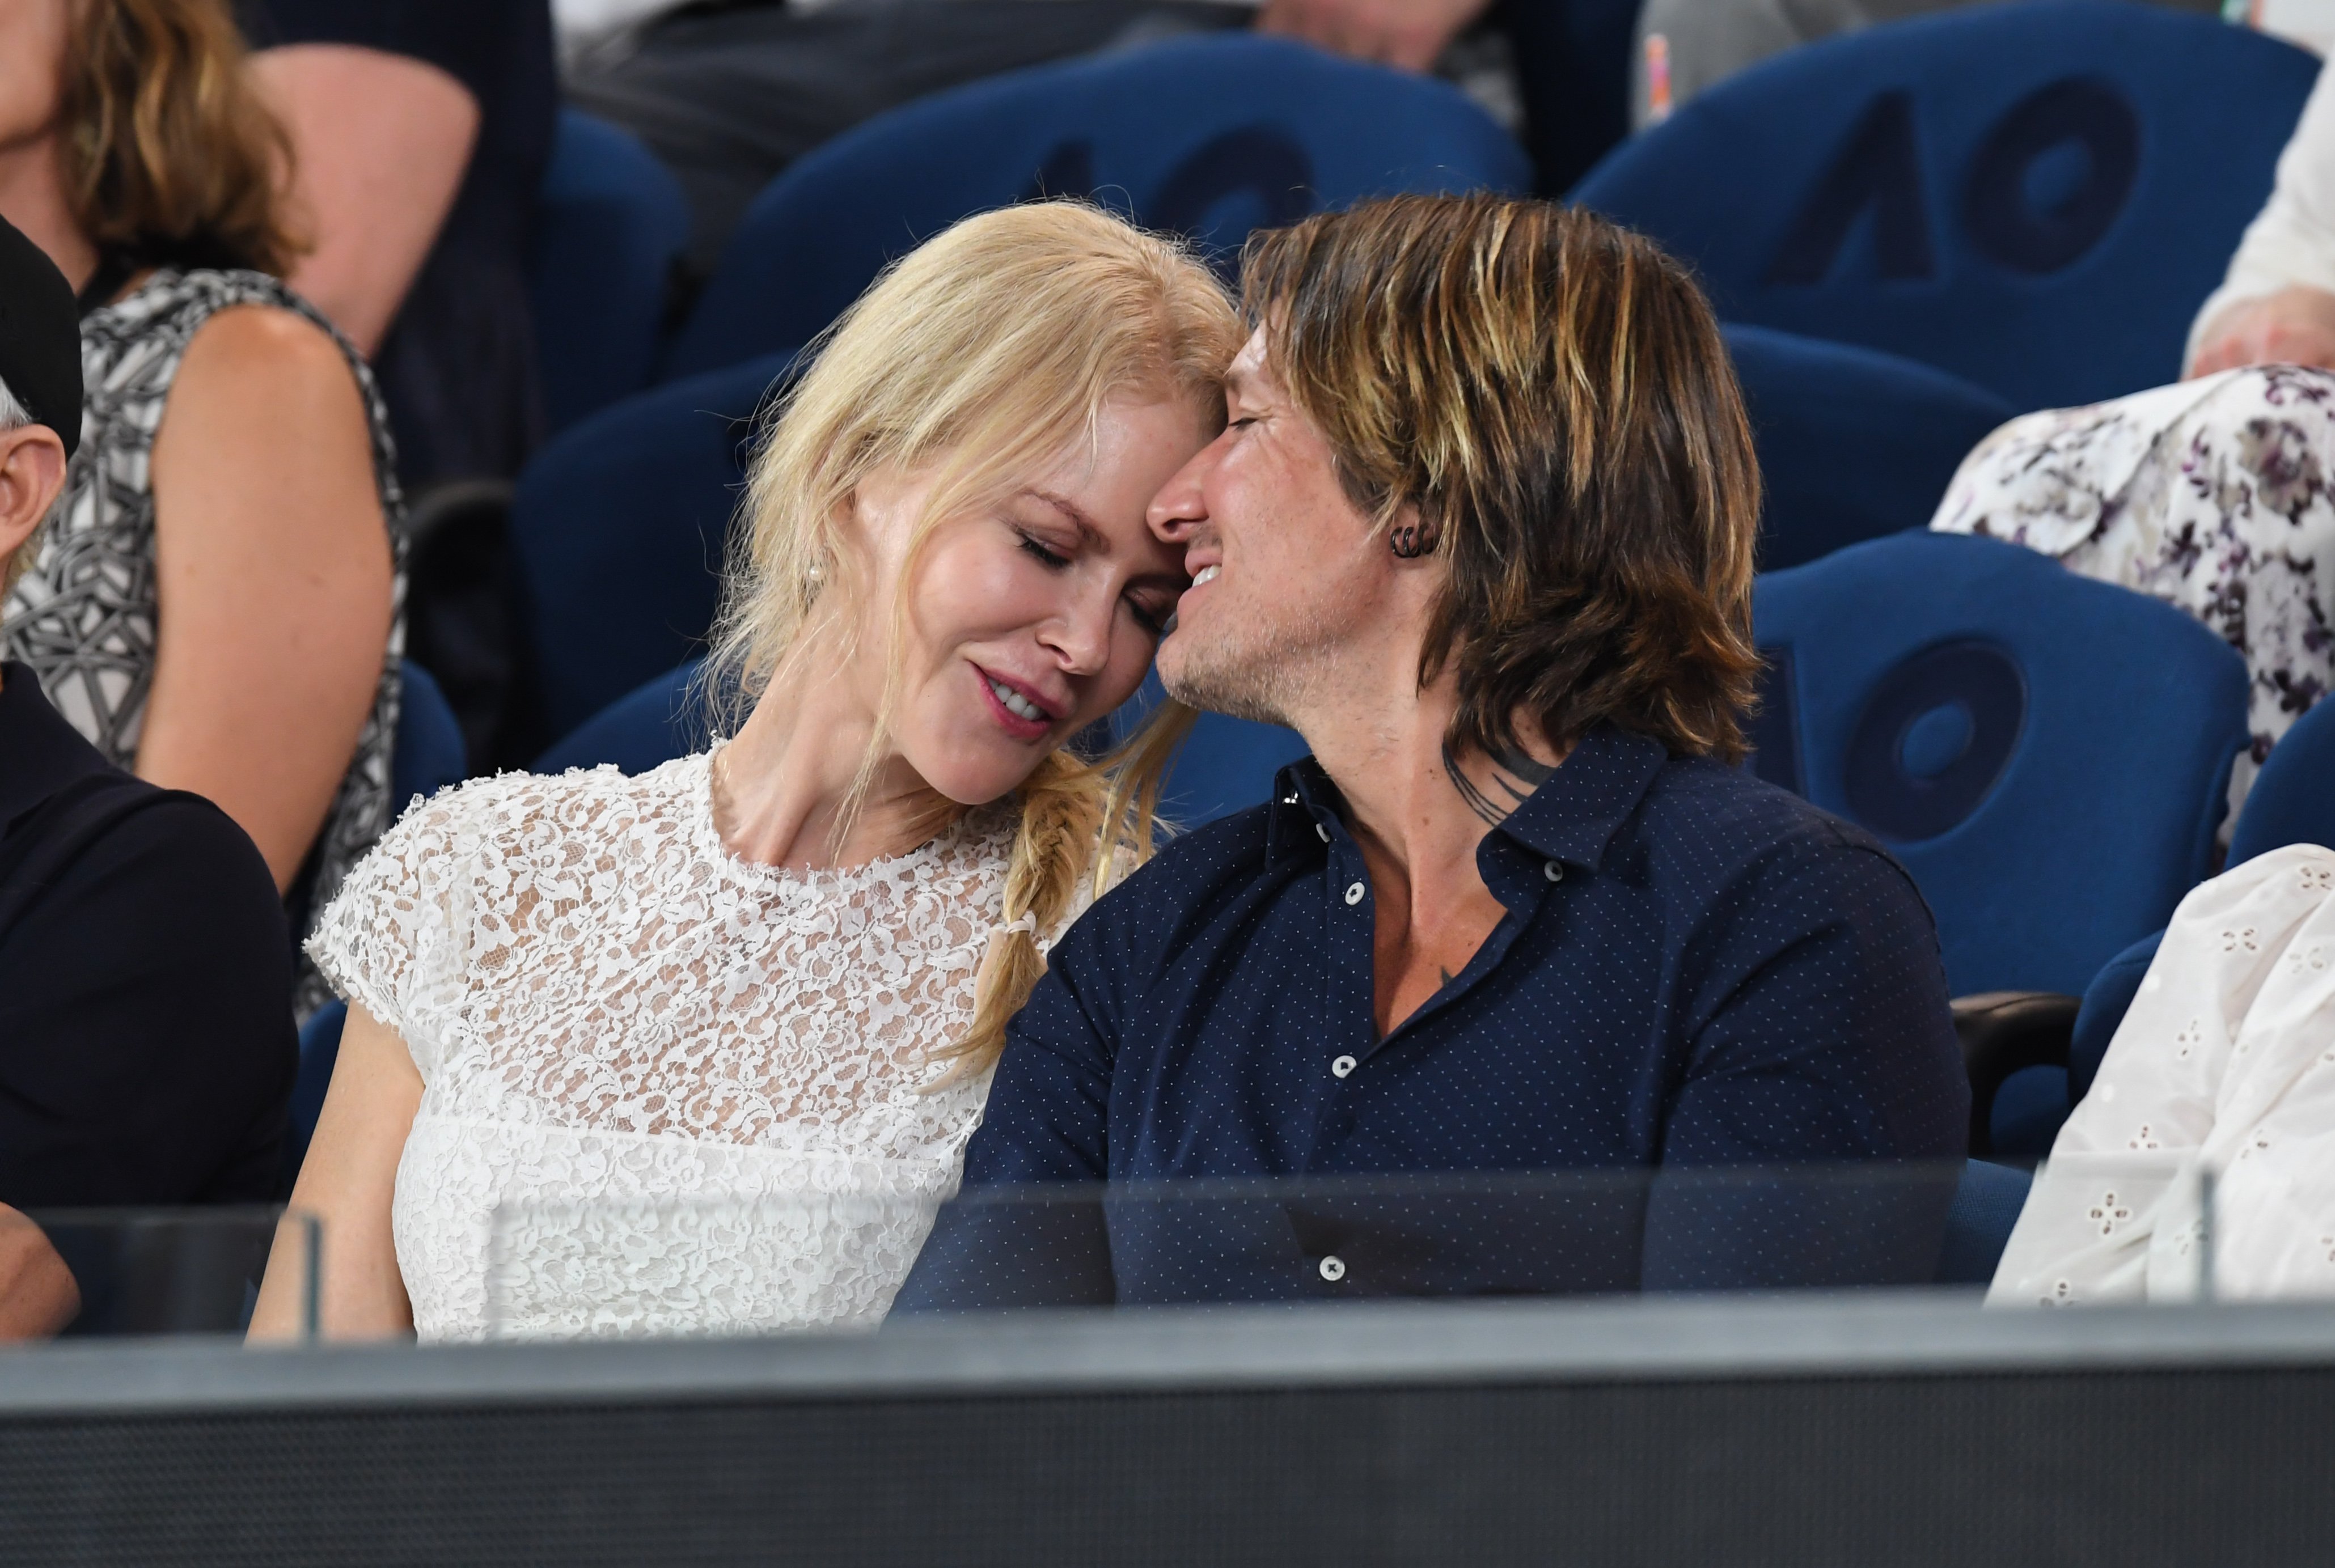 Nicole Kidman and Keith Urban share an affectionate moment during one of the women's semi finals at the 2019 Australian Open | Source: Getty images